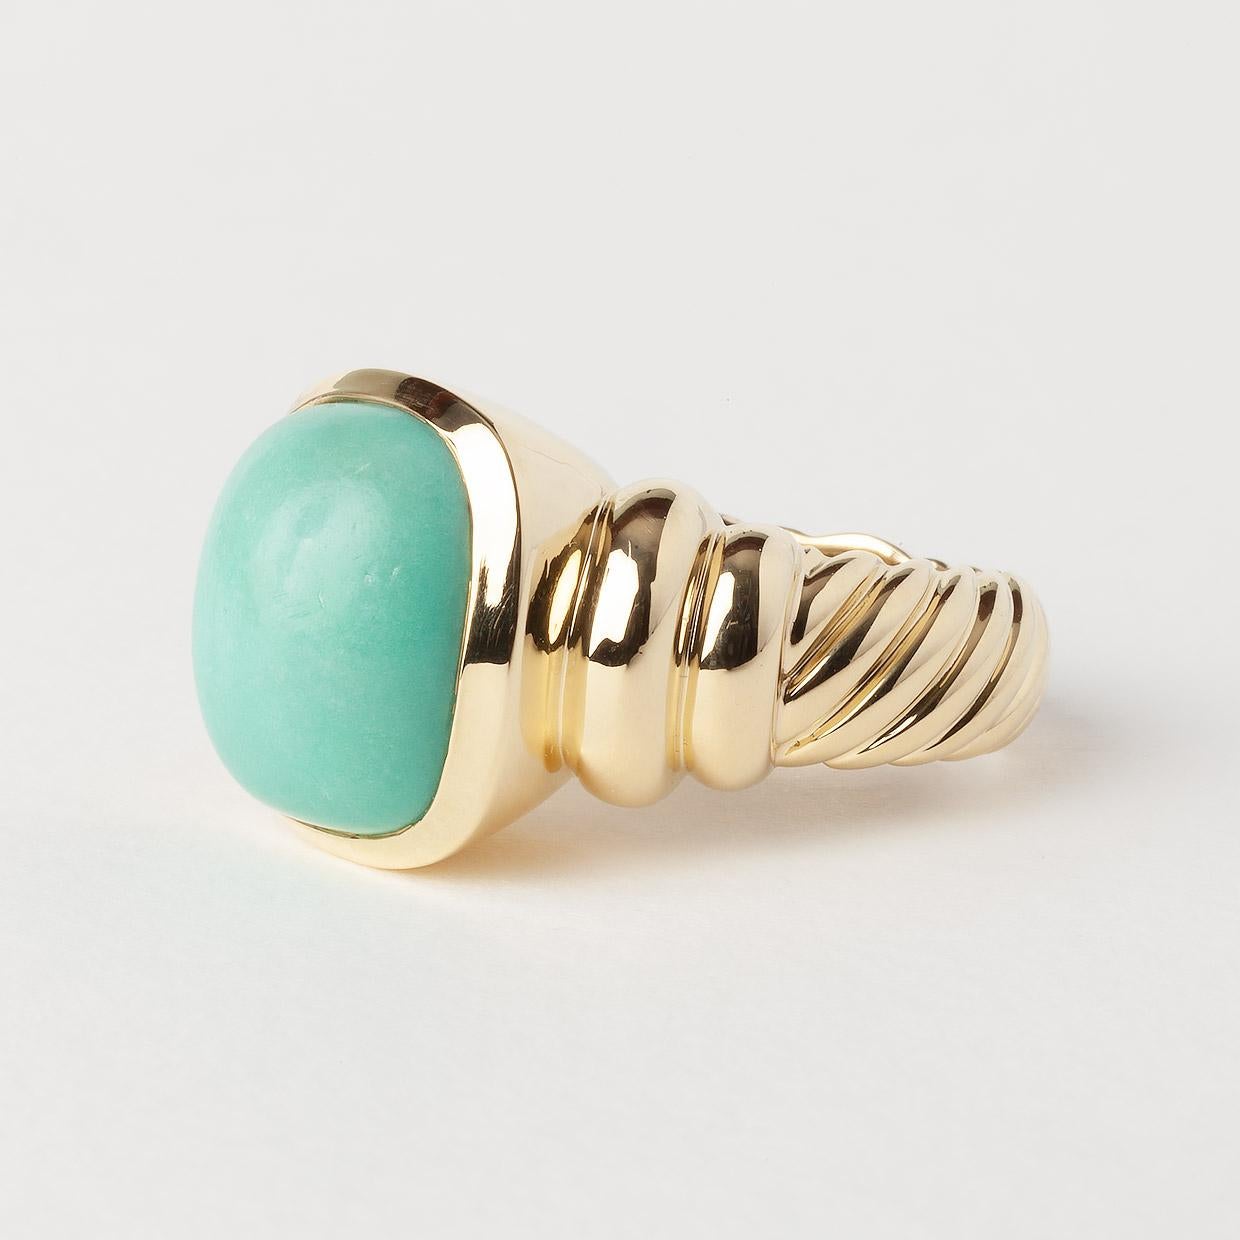 Product Details:
Total Carat Weight: Not Specified
Main Stone: Turquoise
Main Stone Color: Turq
Main Stone Shape: Specialty
Main Stone Treatment: Not Enhanced
Main Stone Creation: Natural
Estimated Retail:  $4,400.00
Condition: Pre Owned
Brand: